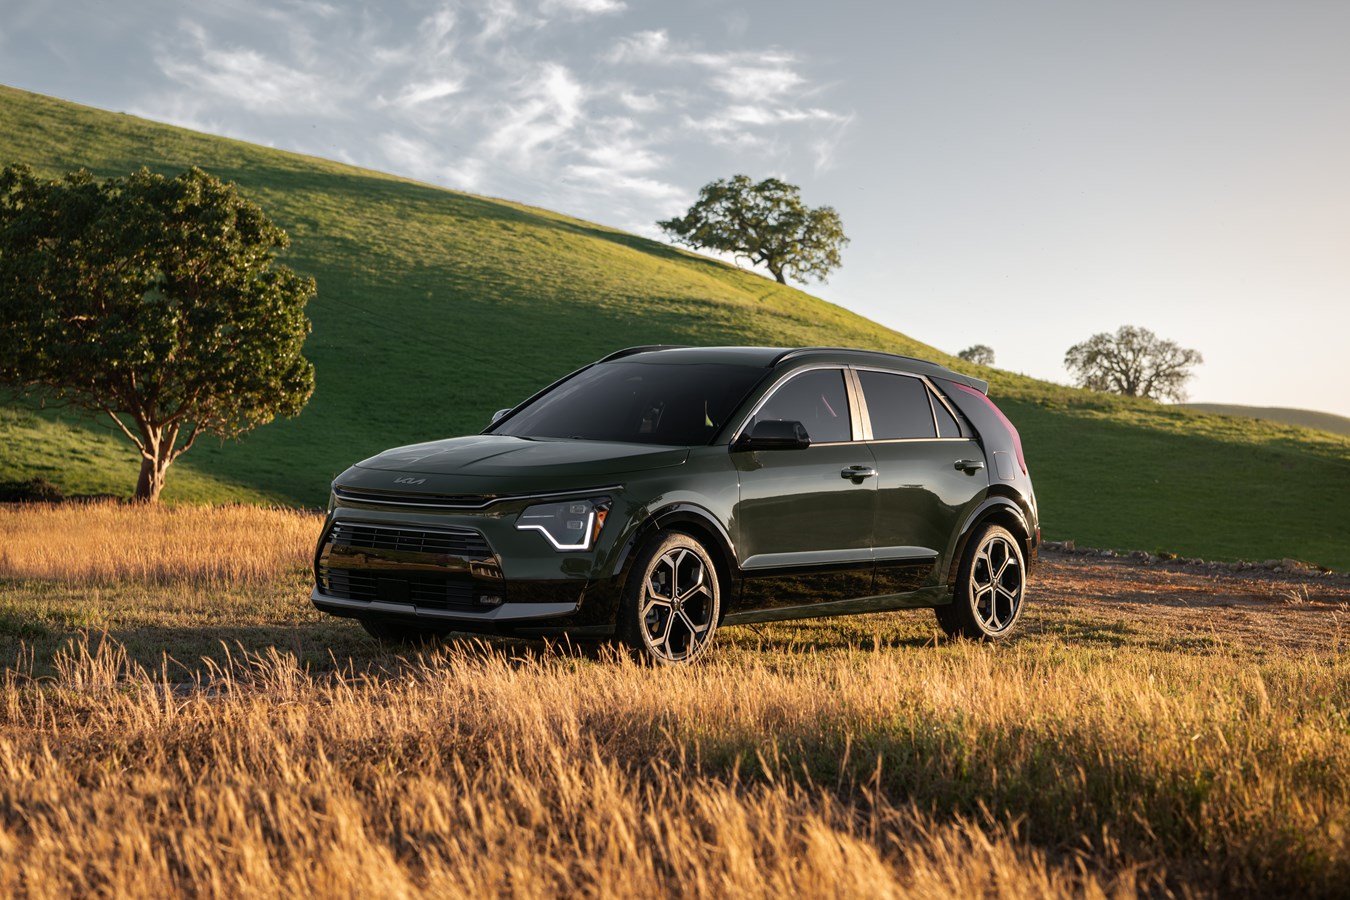 2023 Kia Niro Hybrid costs $27,785, gets up to 53 mpg combined